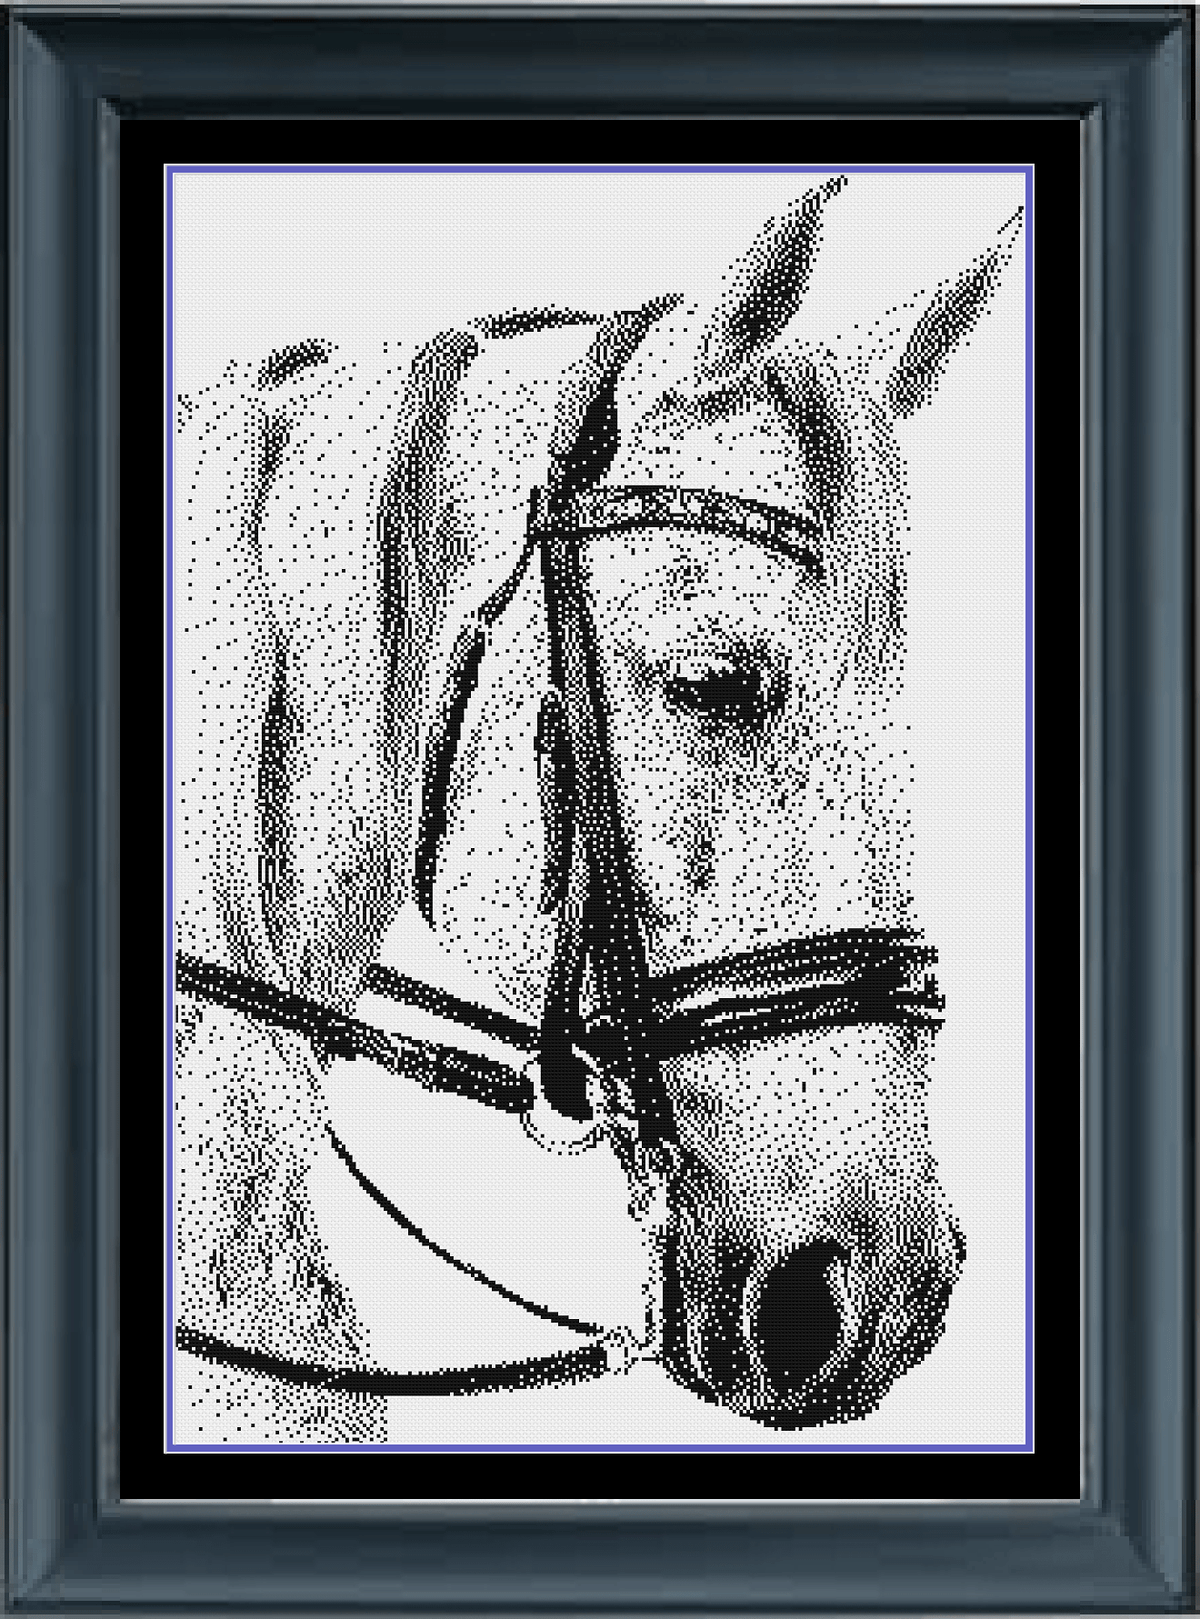 Stitching Jules Design Cross Stitch Pattern Horse Head Equine Animal Monochrome Cross Stitch Needlepoint Embroidery Pattern - Instant Download - Pattern Keeper Ready